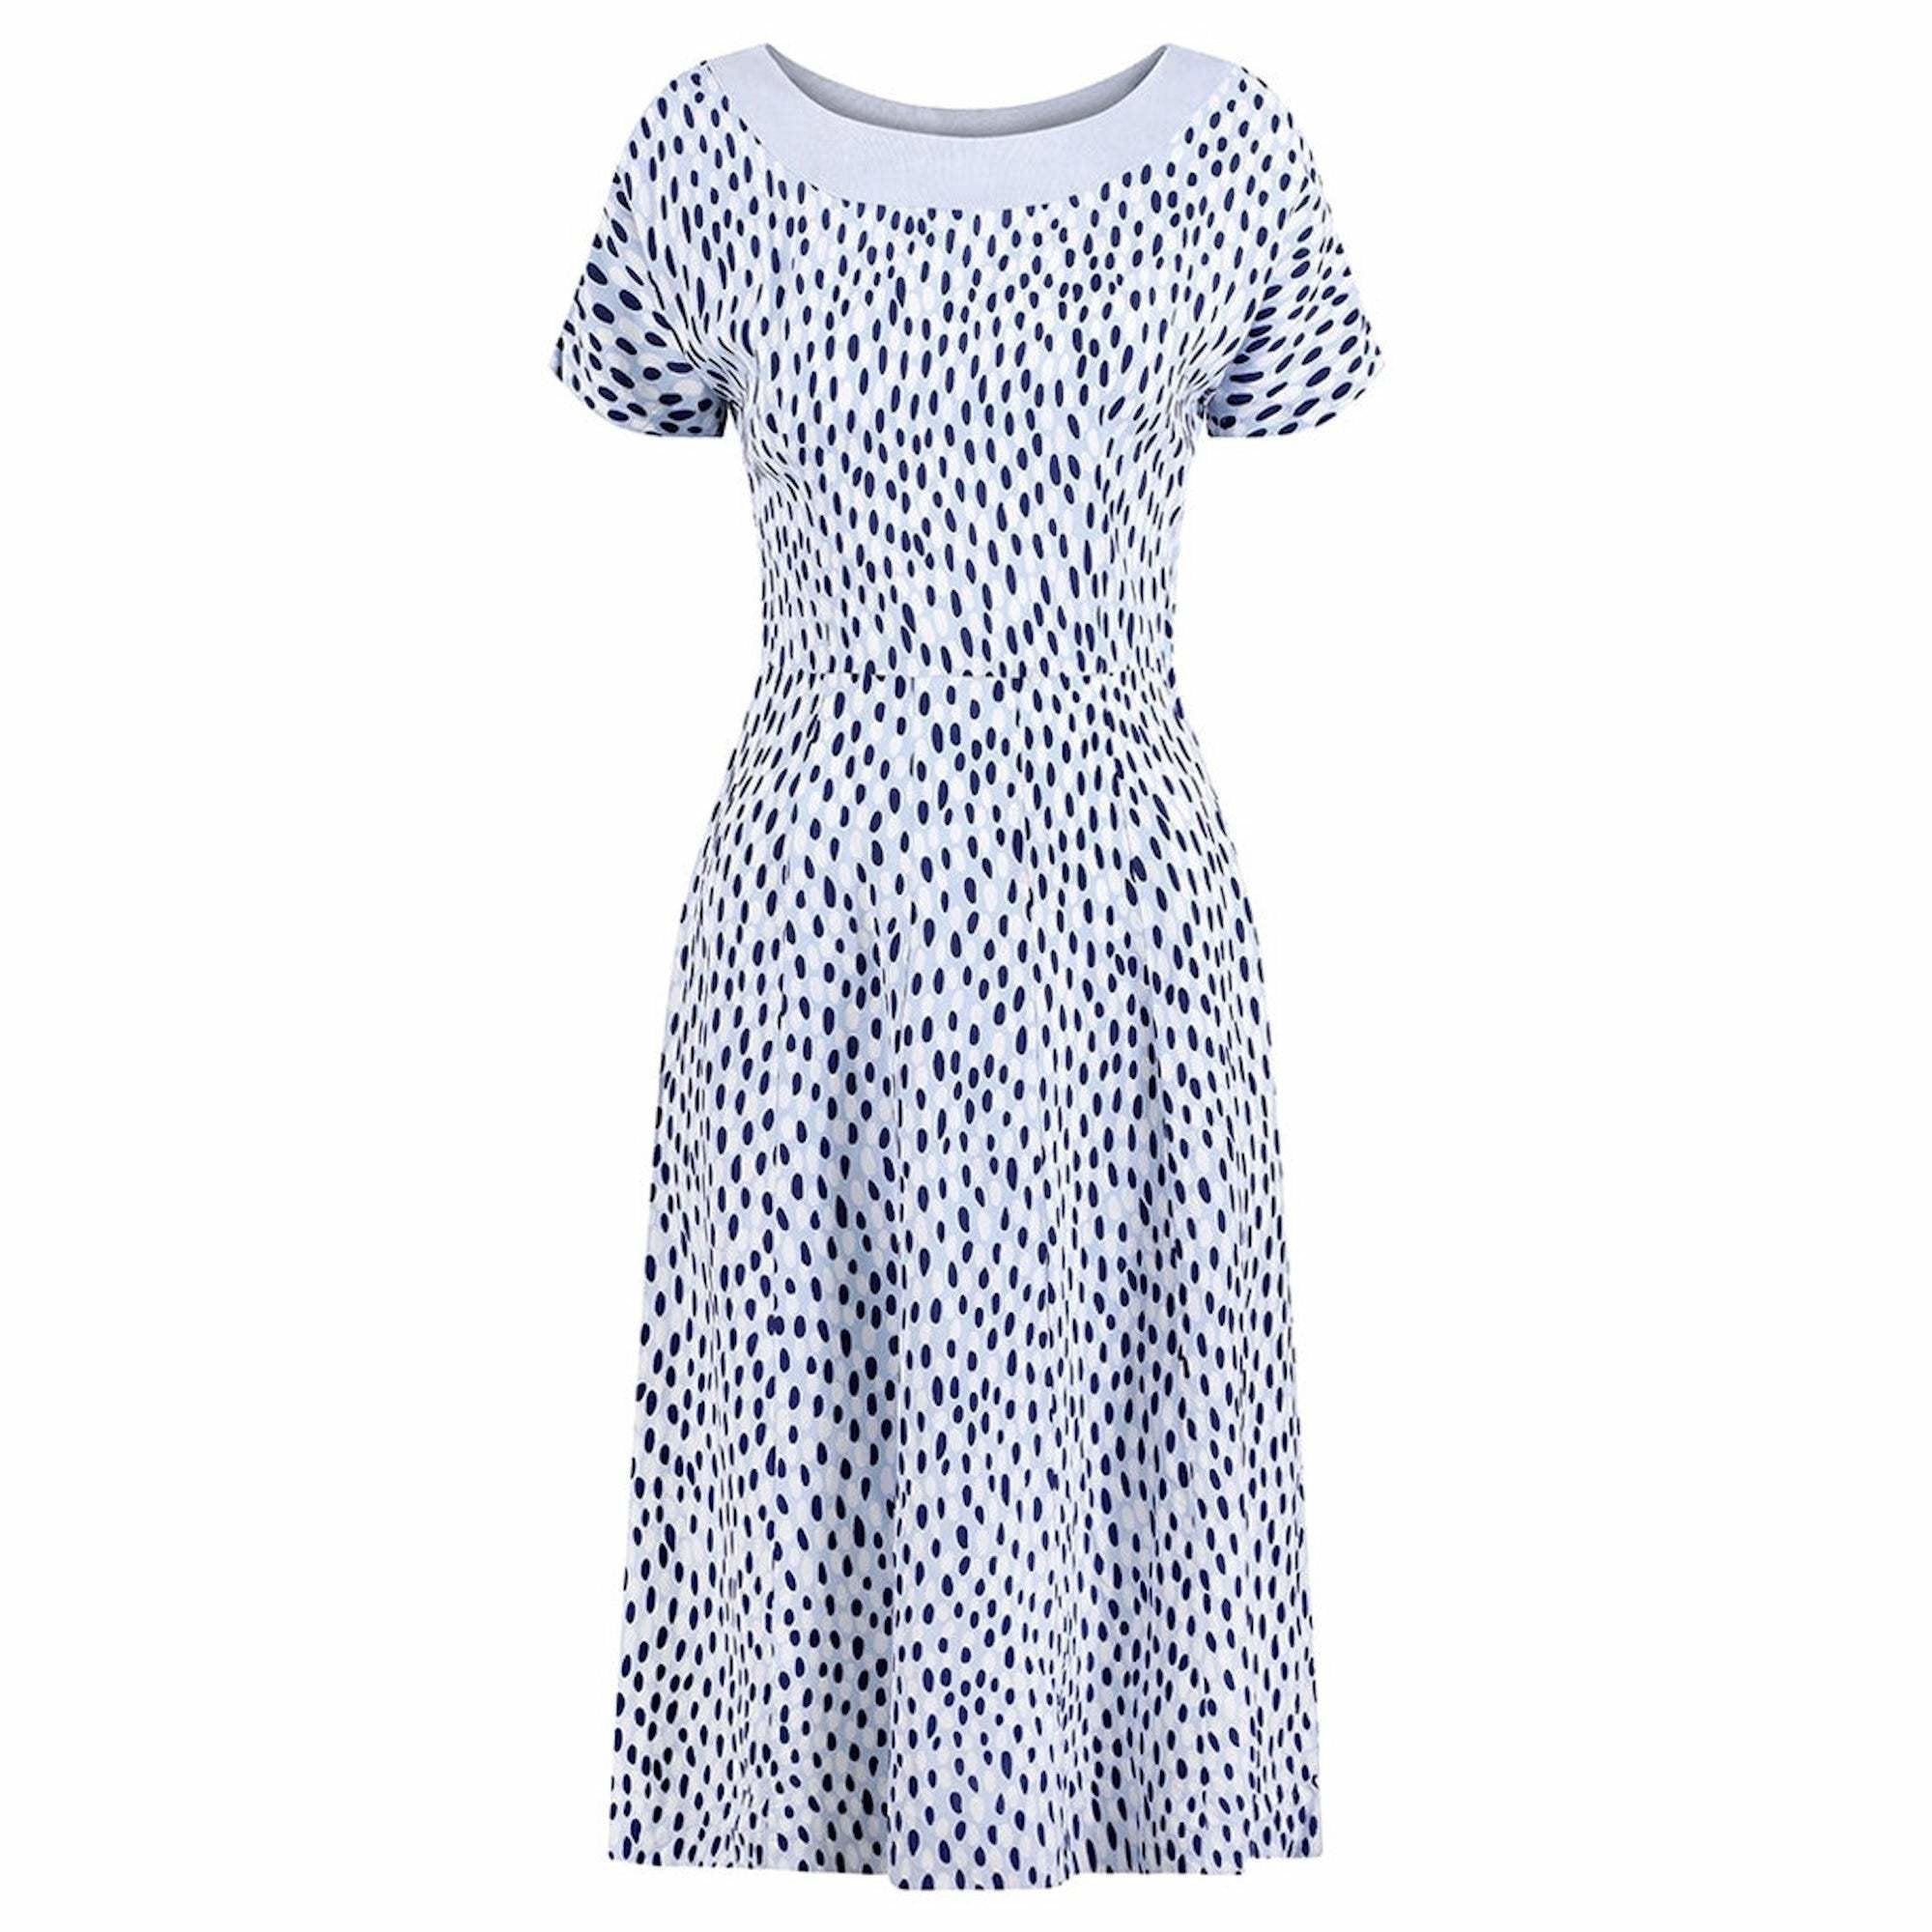 1940s Pale Blue Rayon Dress With Navy And White Pebble Print